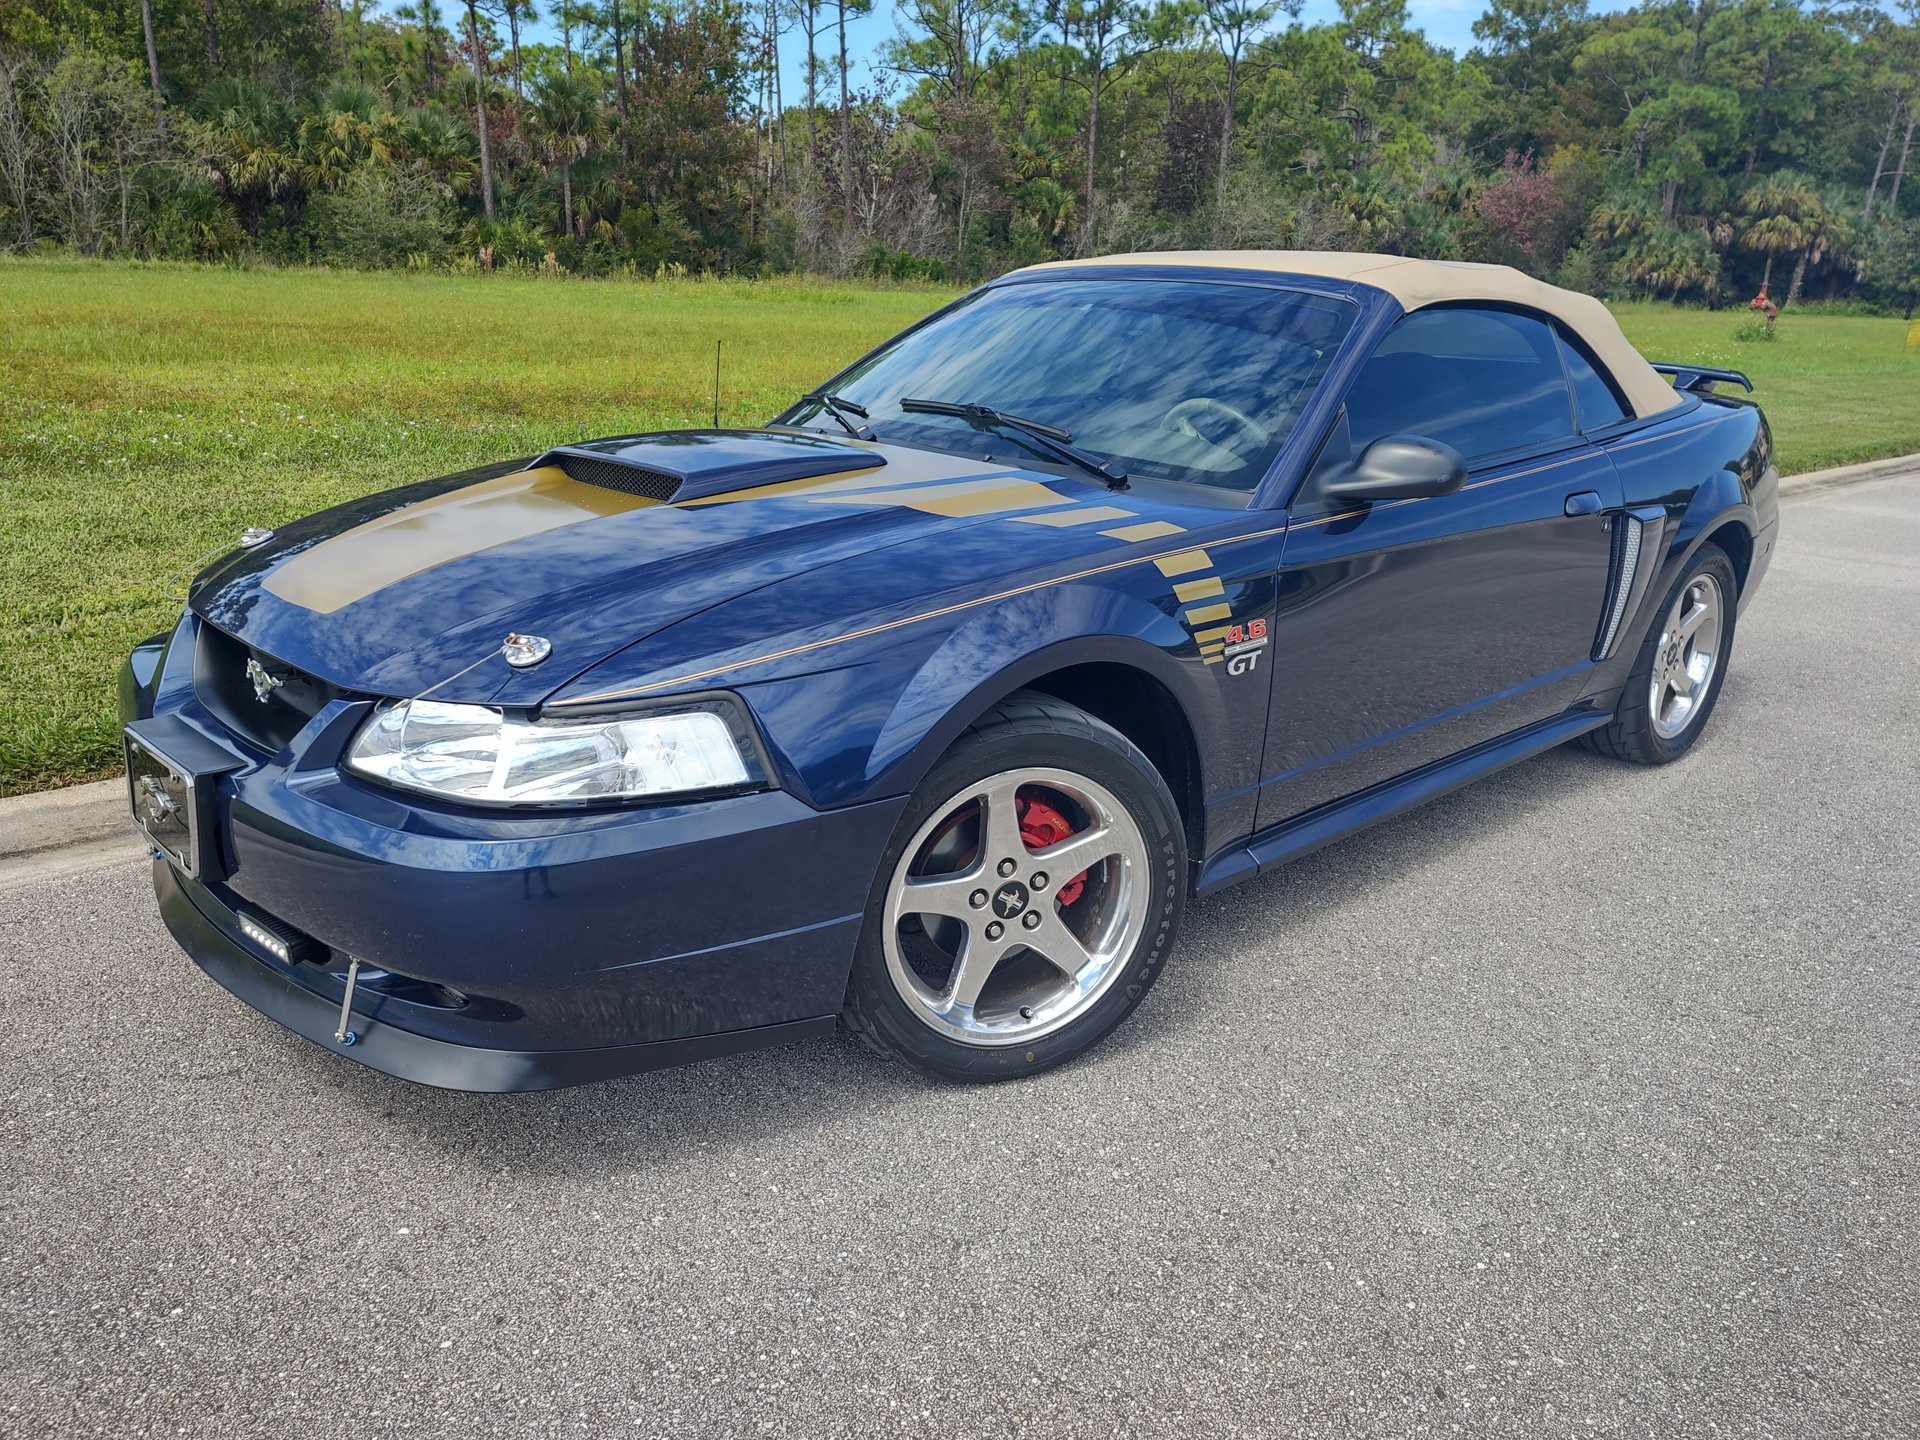 2003 ford mustang gt convertible